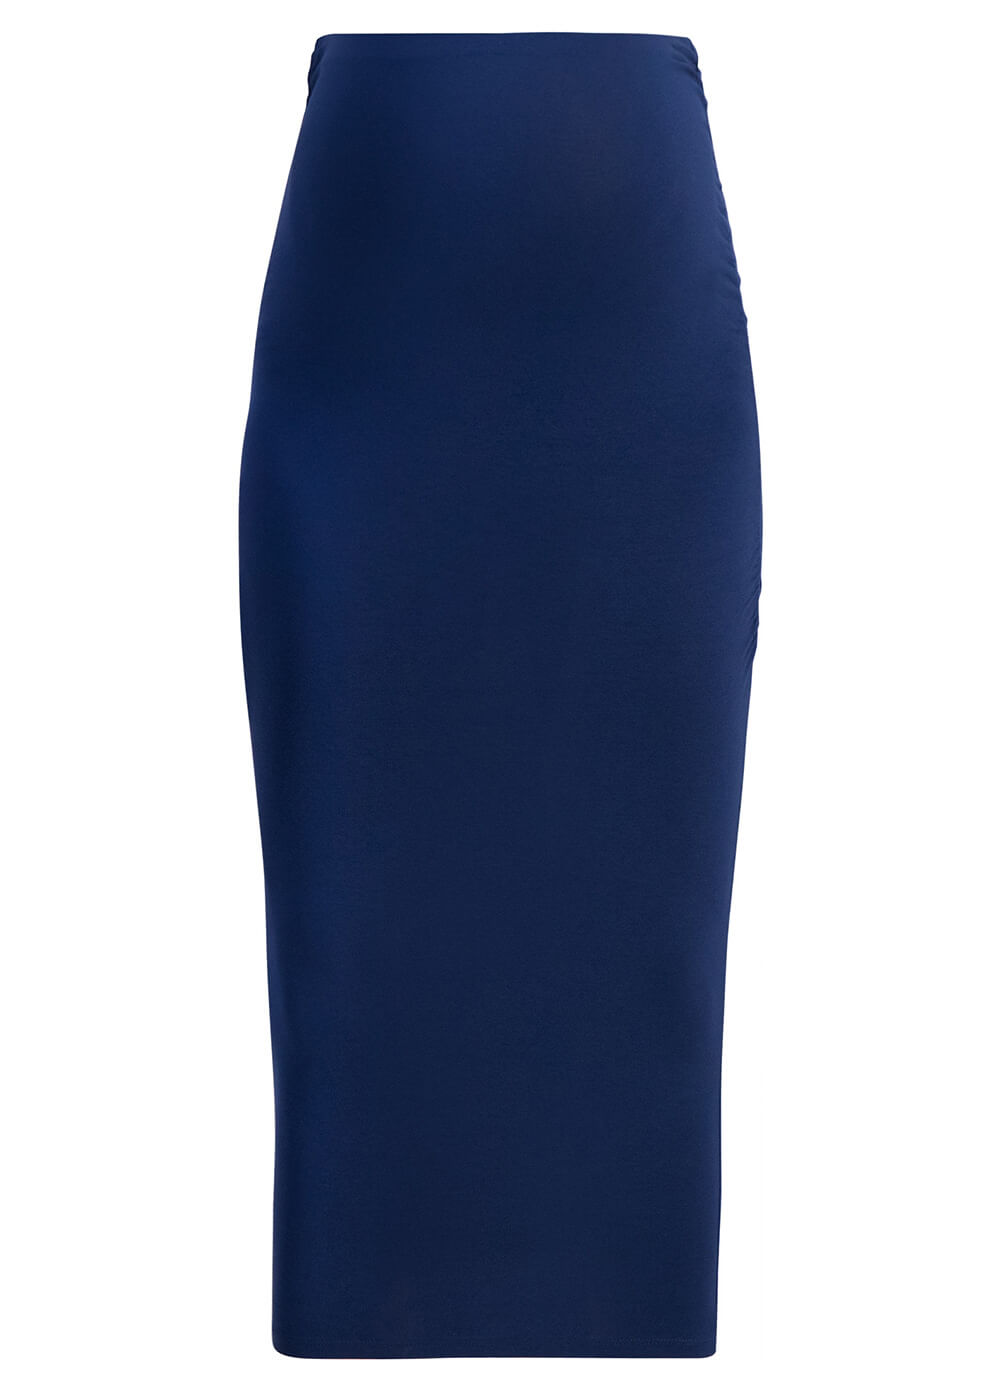 Camilla Maternity 3 Way Dress Skirt in Midnight Blue by Noppies